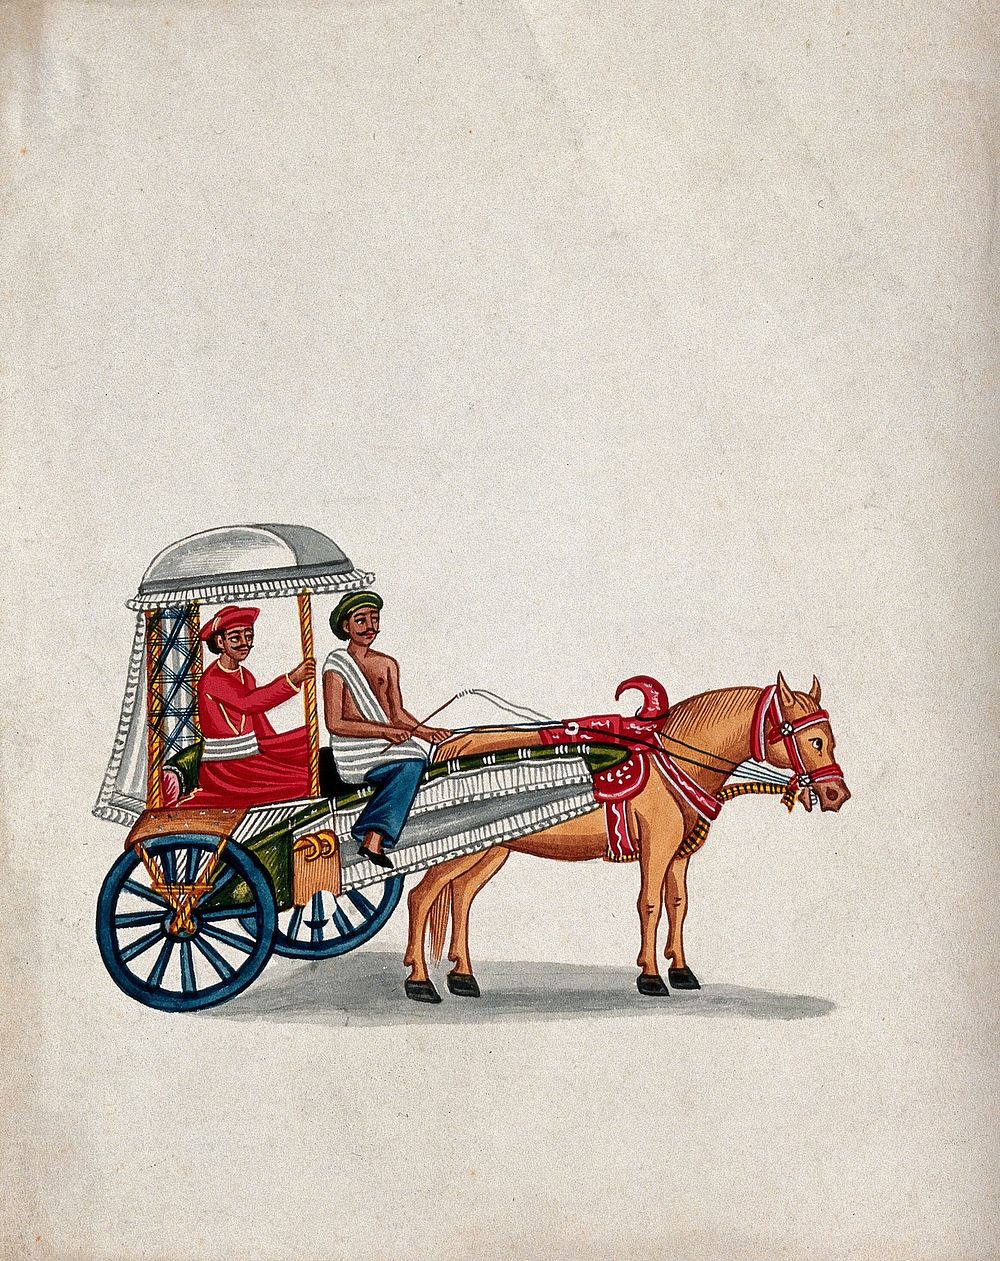 A man sitting in a small carriage pulled by a horse. Watercolour by an Indian artist.